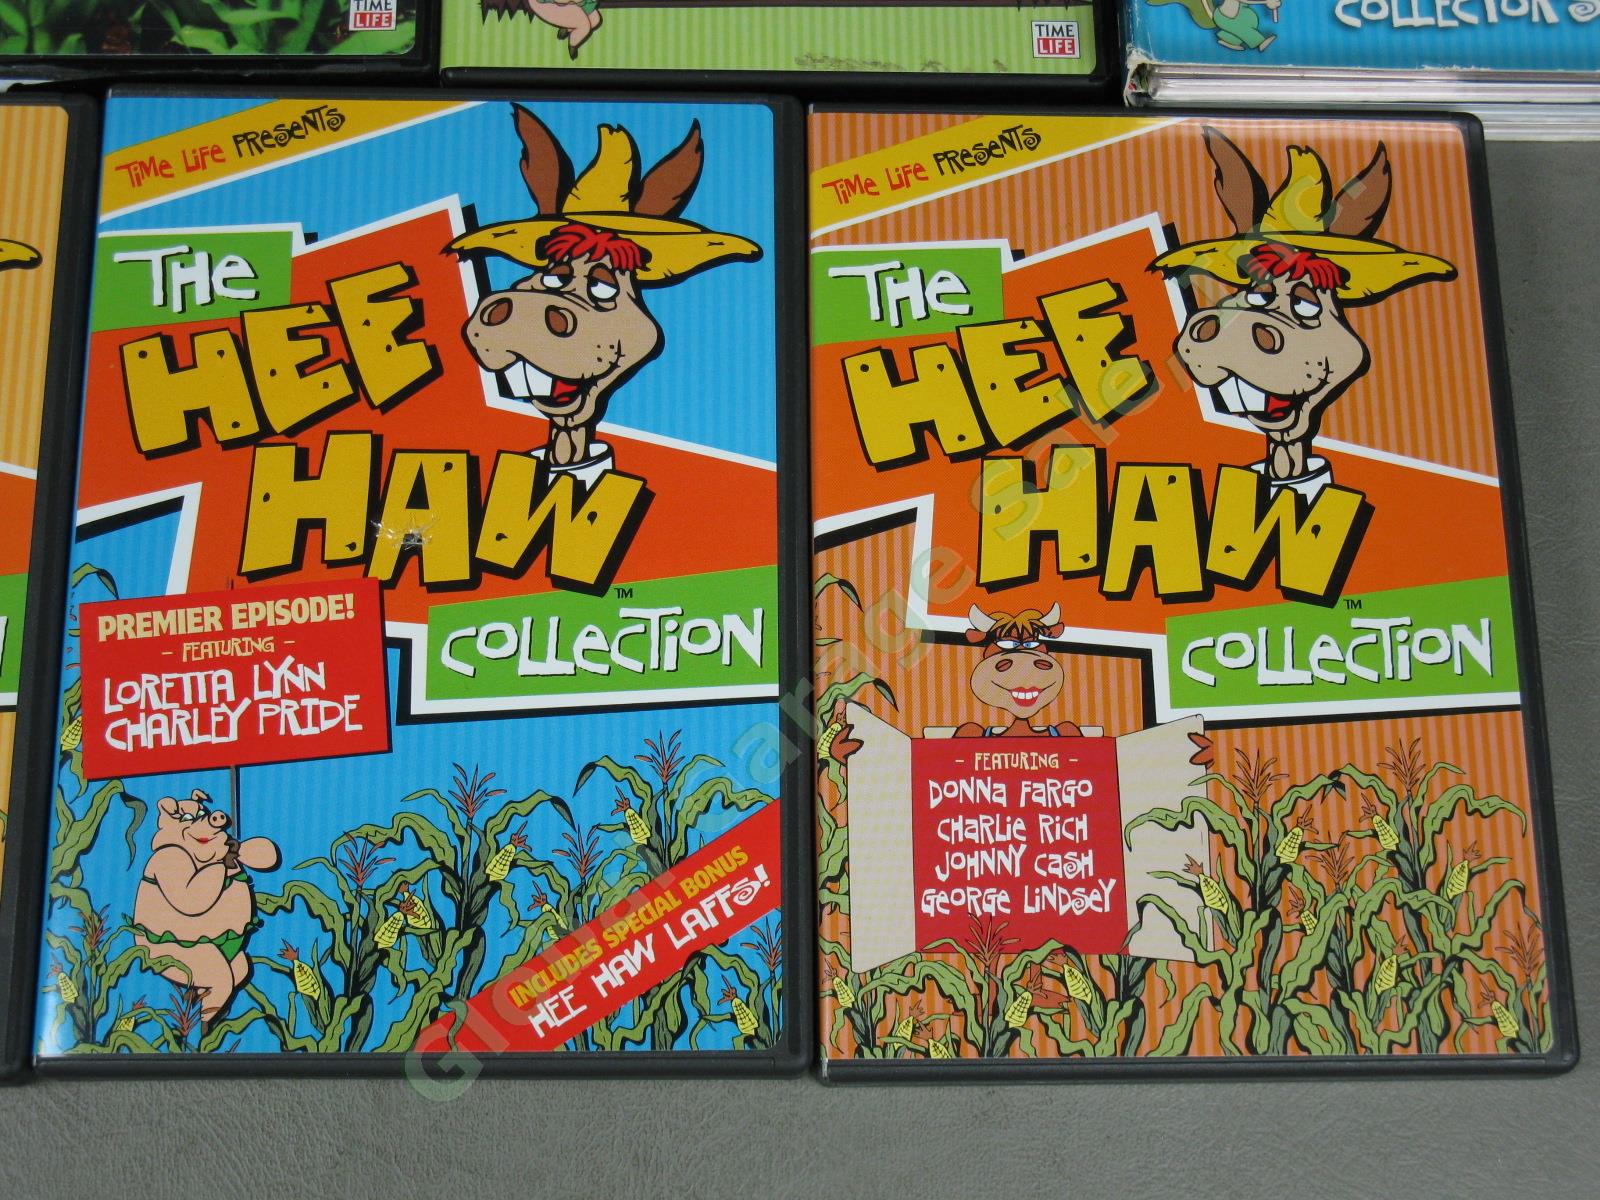 Hee Haw TV Series DVD Box Lot Collection Collectors Edition Laffs Anniversary NR 5